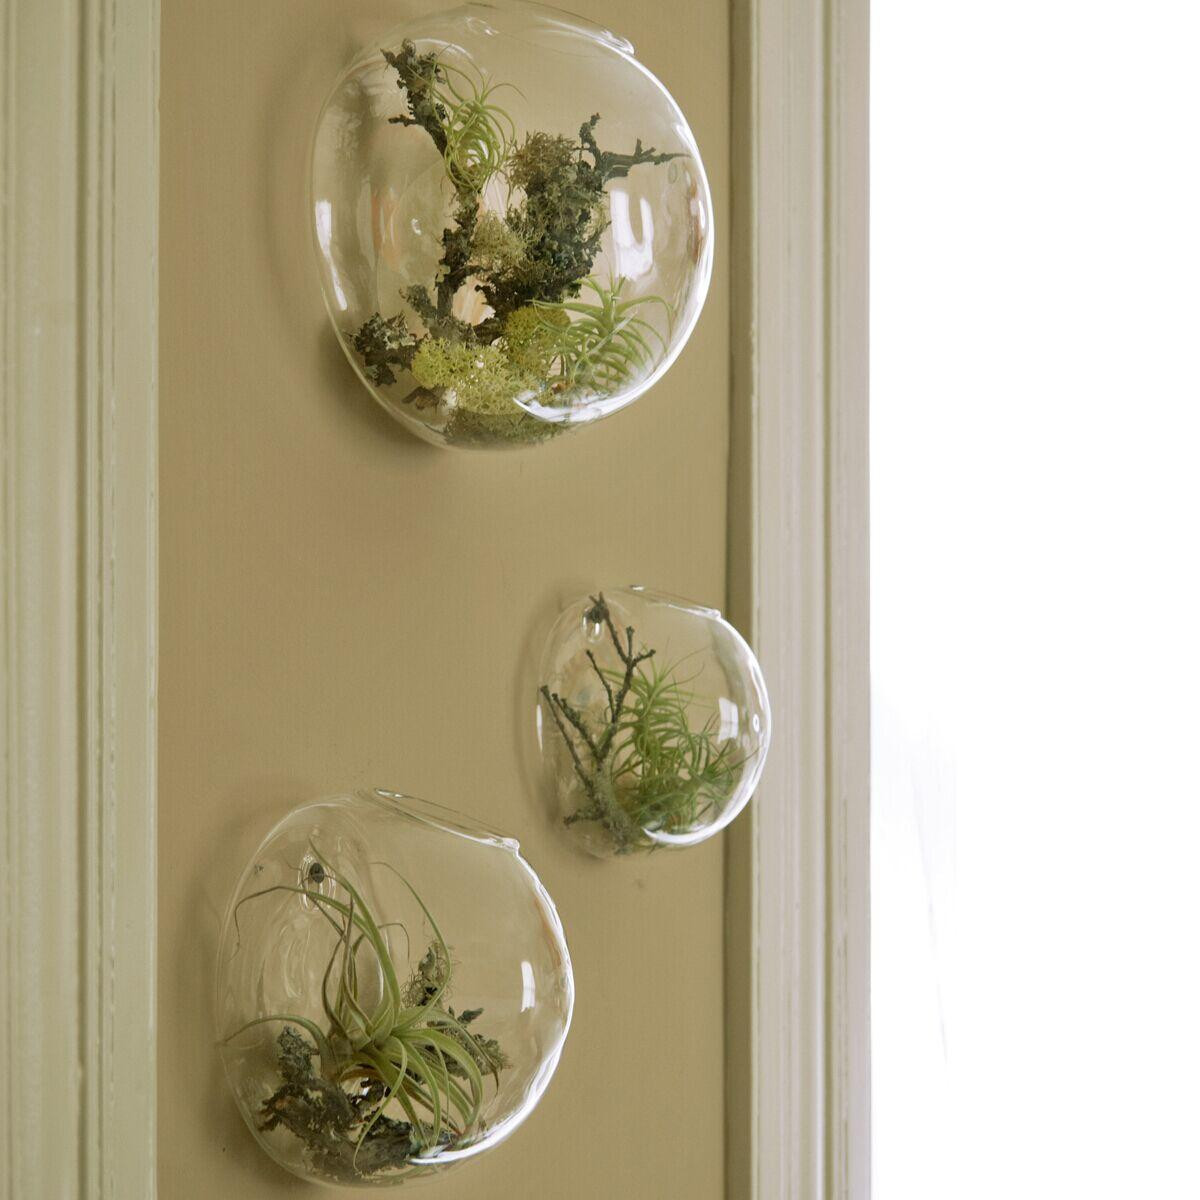 Glass Vase with Bubbles Of Wall Bubble Terrariums Glass Wall Vase for Flowers Indoor Plants Inside Wall Bubble Terrariums Glass Wall Vase for Flowers Indoor Plants Wall Mounted Planter for Succulents Air Plant Holders Home Decor Wall Bubble Terrariums